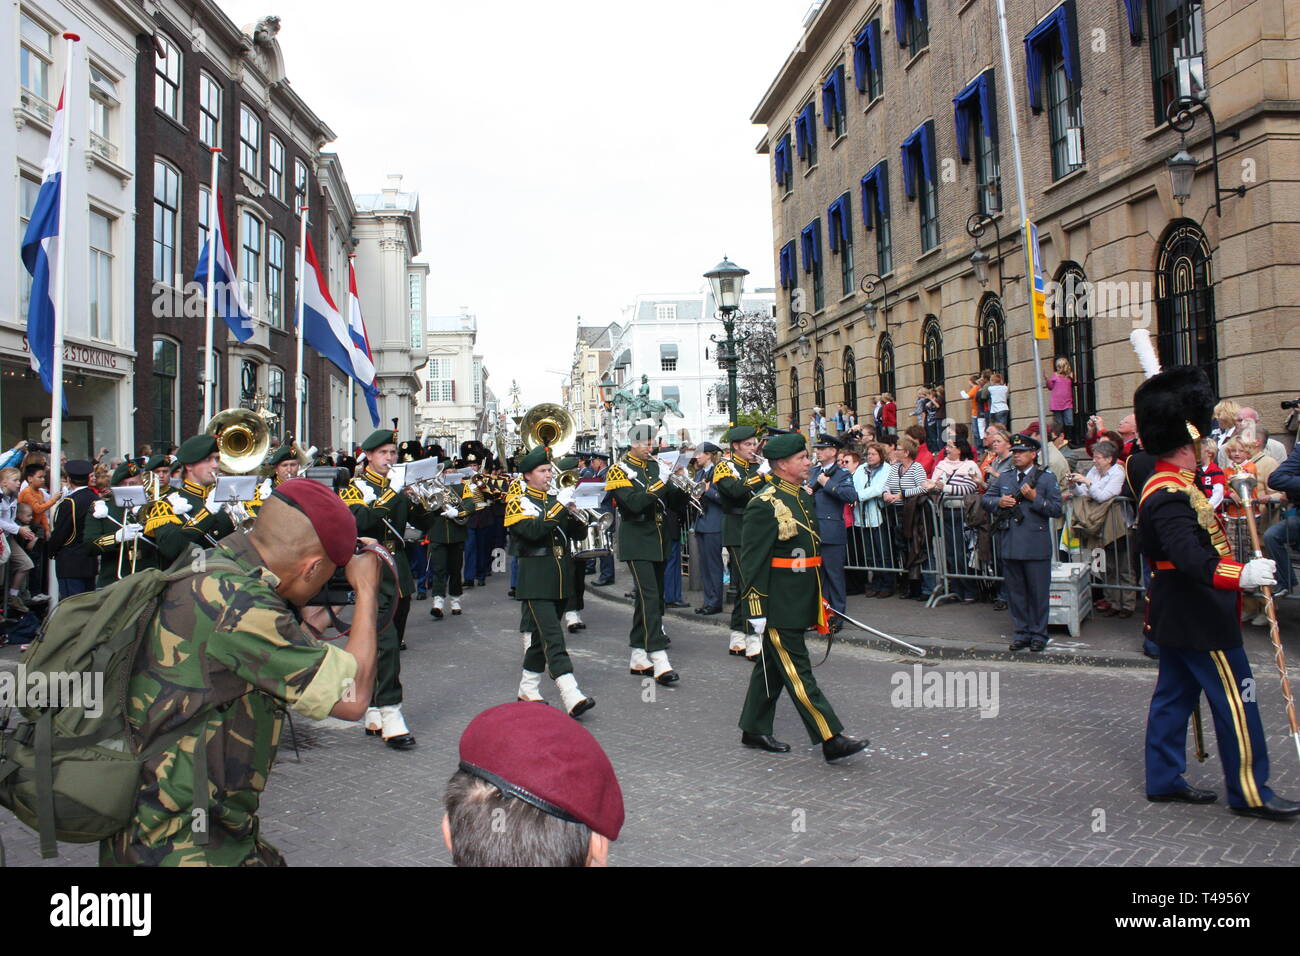 The Central Royal Military Band of the Netherlands Army was marching during the Prinsjesdag Procession in The Hague, South Holland, Netherlands. Stock Photo